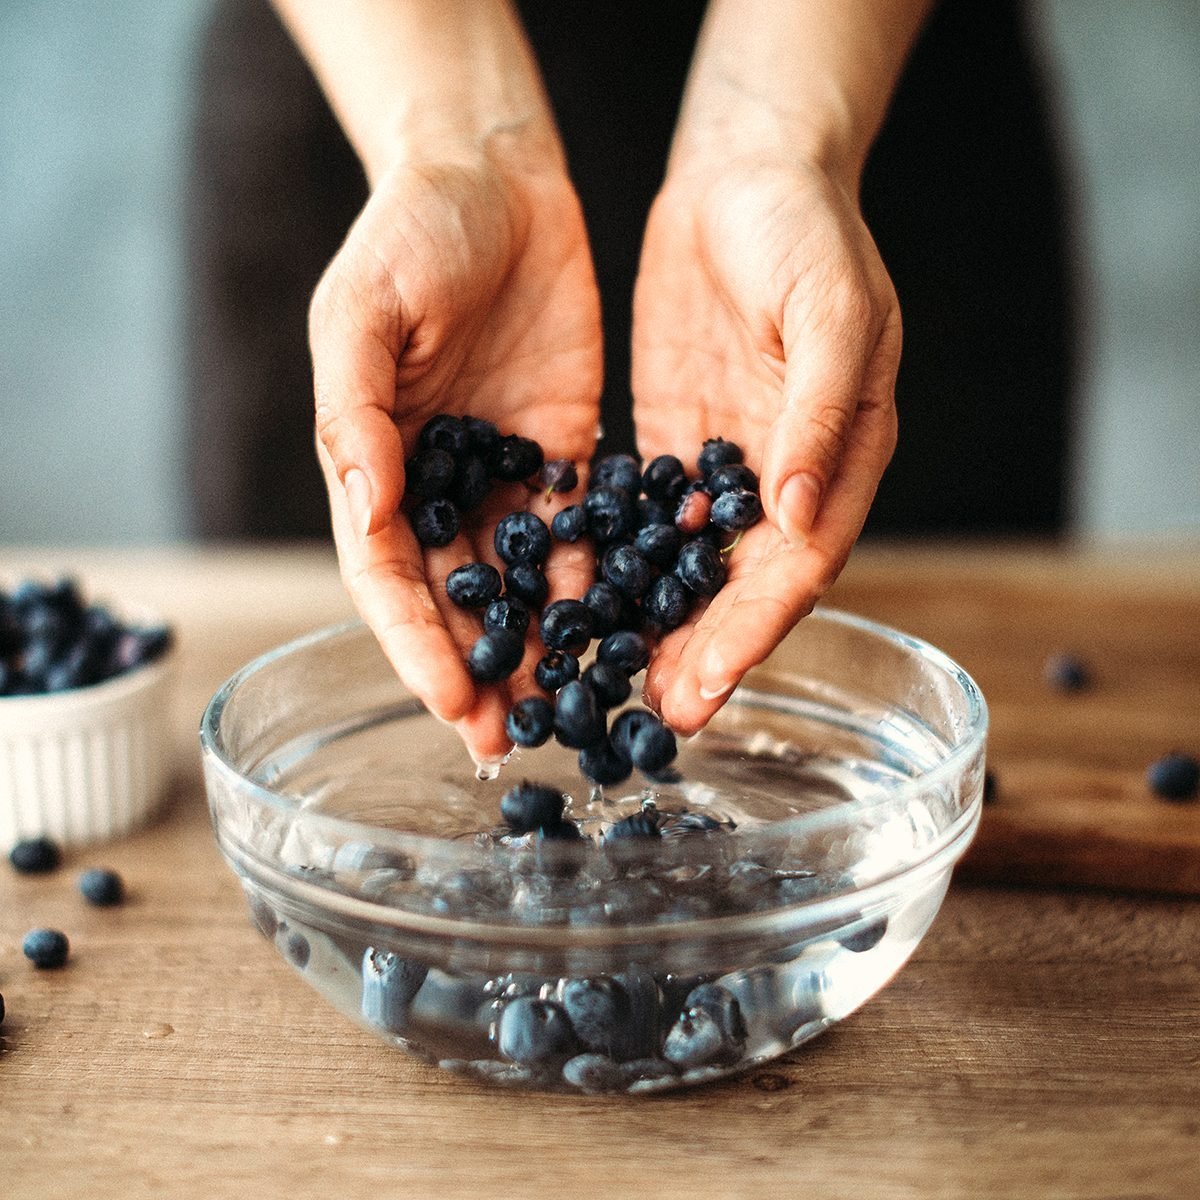 How to Wash Berries for Best Results